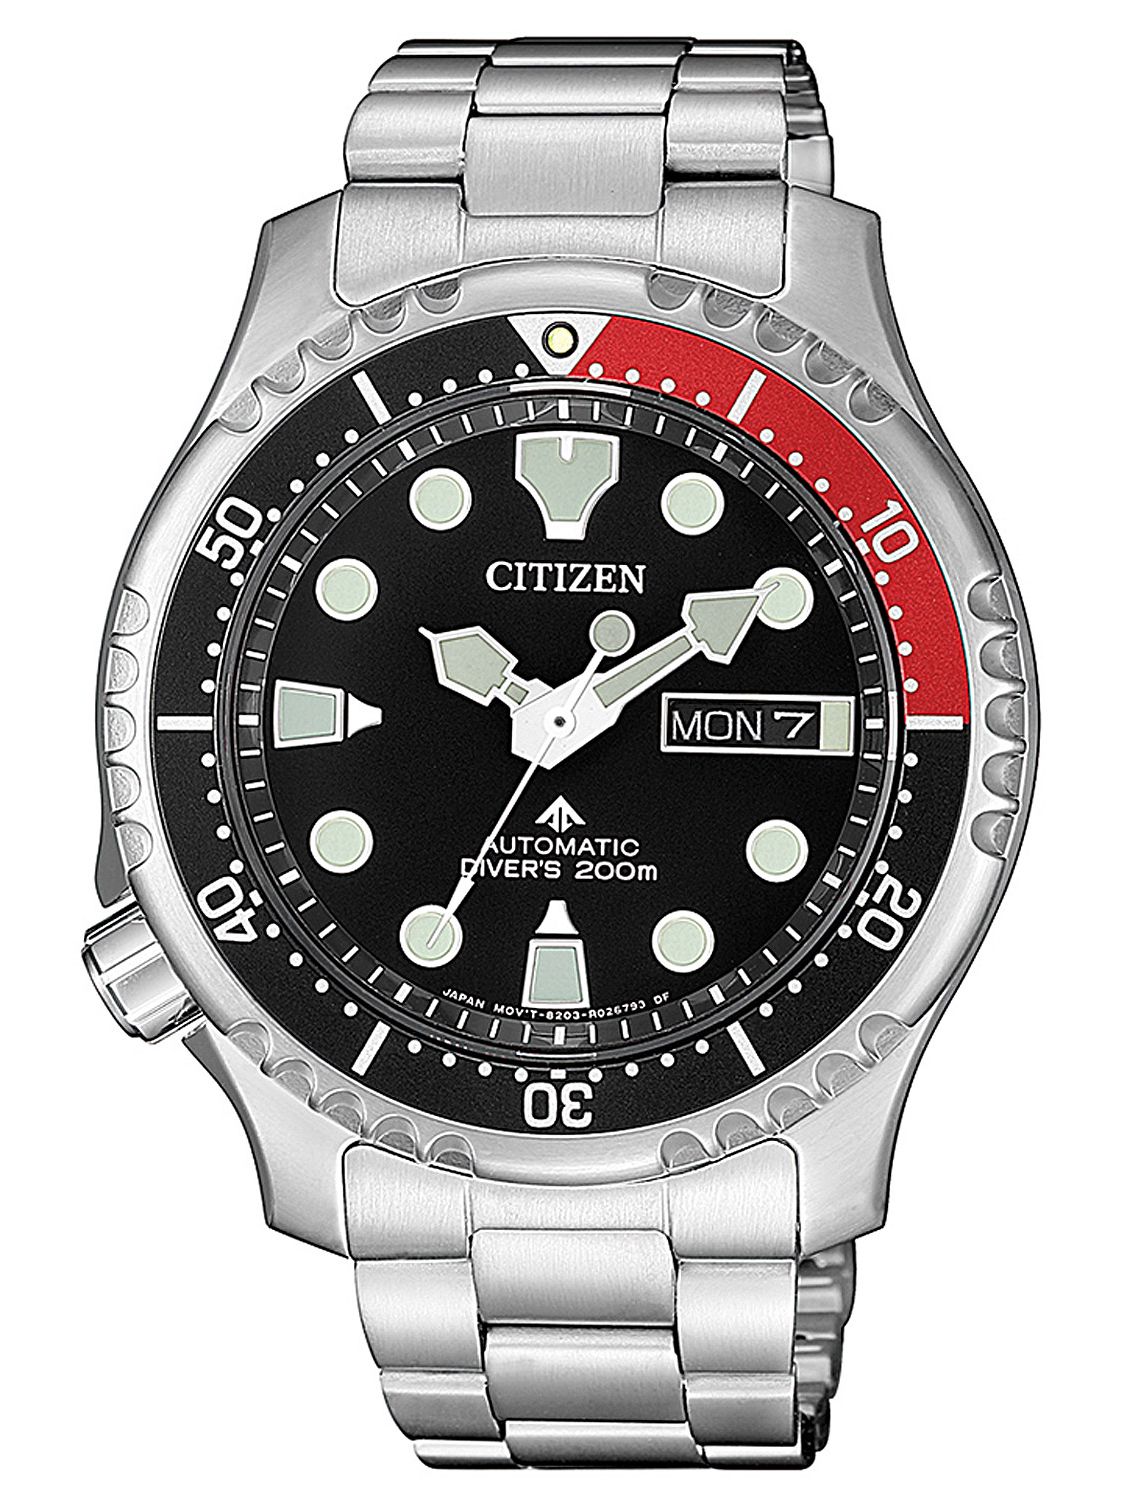 CITIZEN NY0085-86EE Promaster Marine Automatic Diver Watch